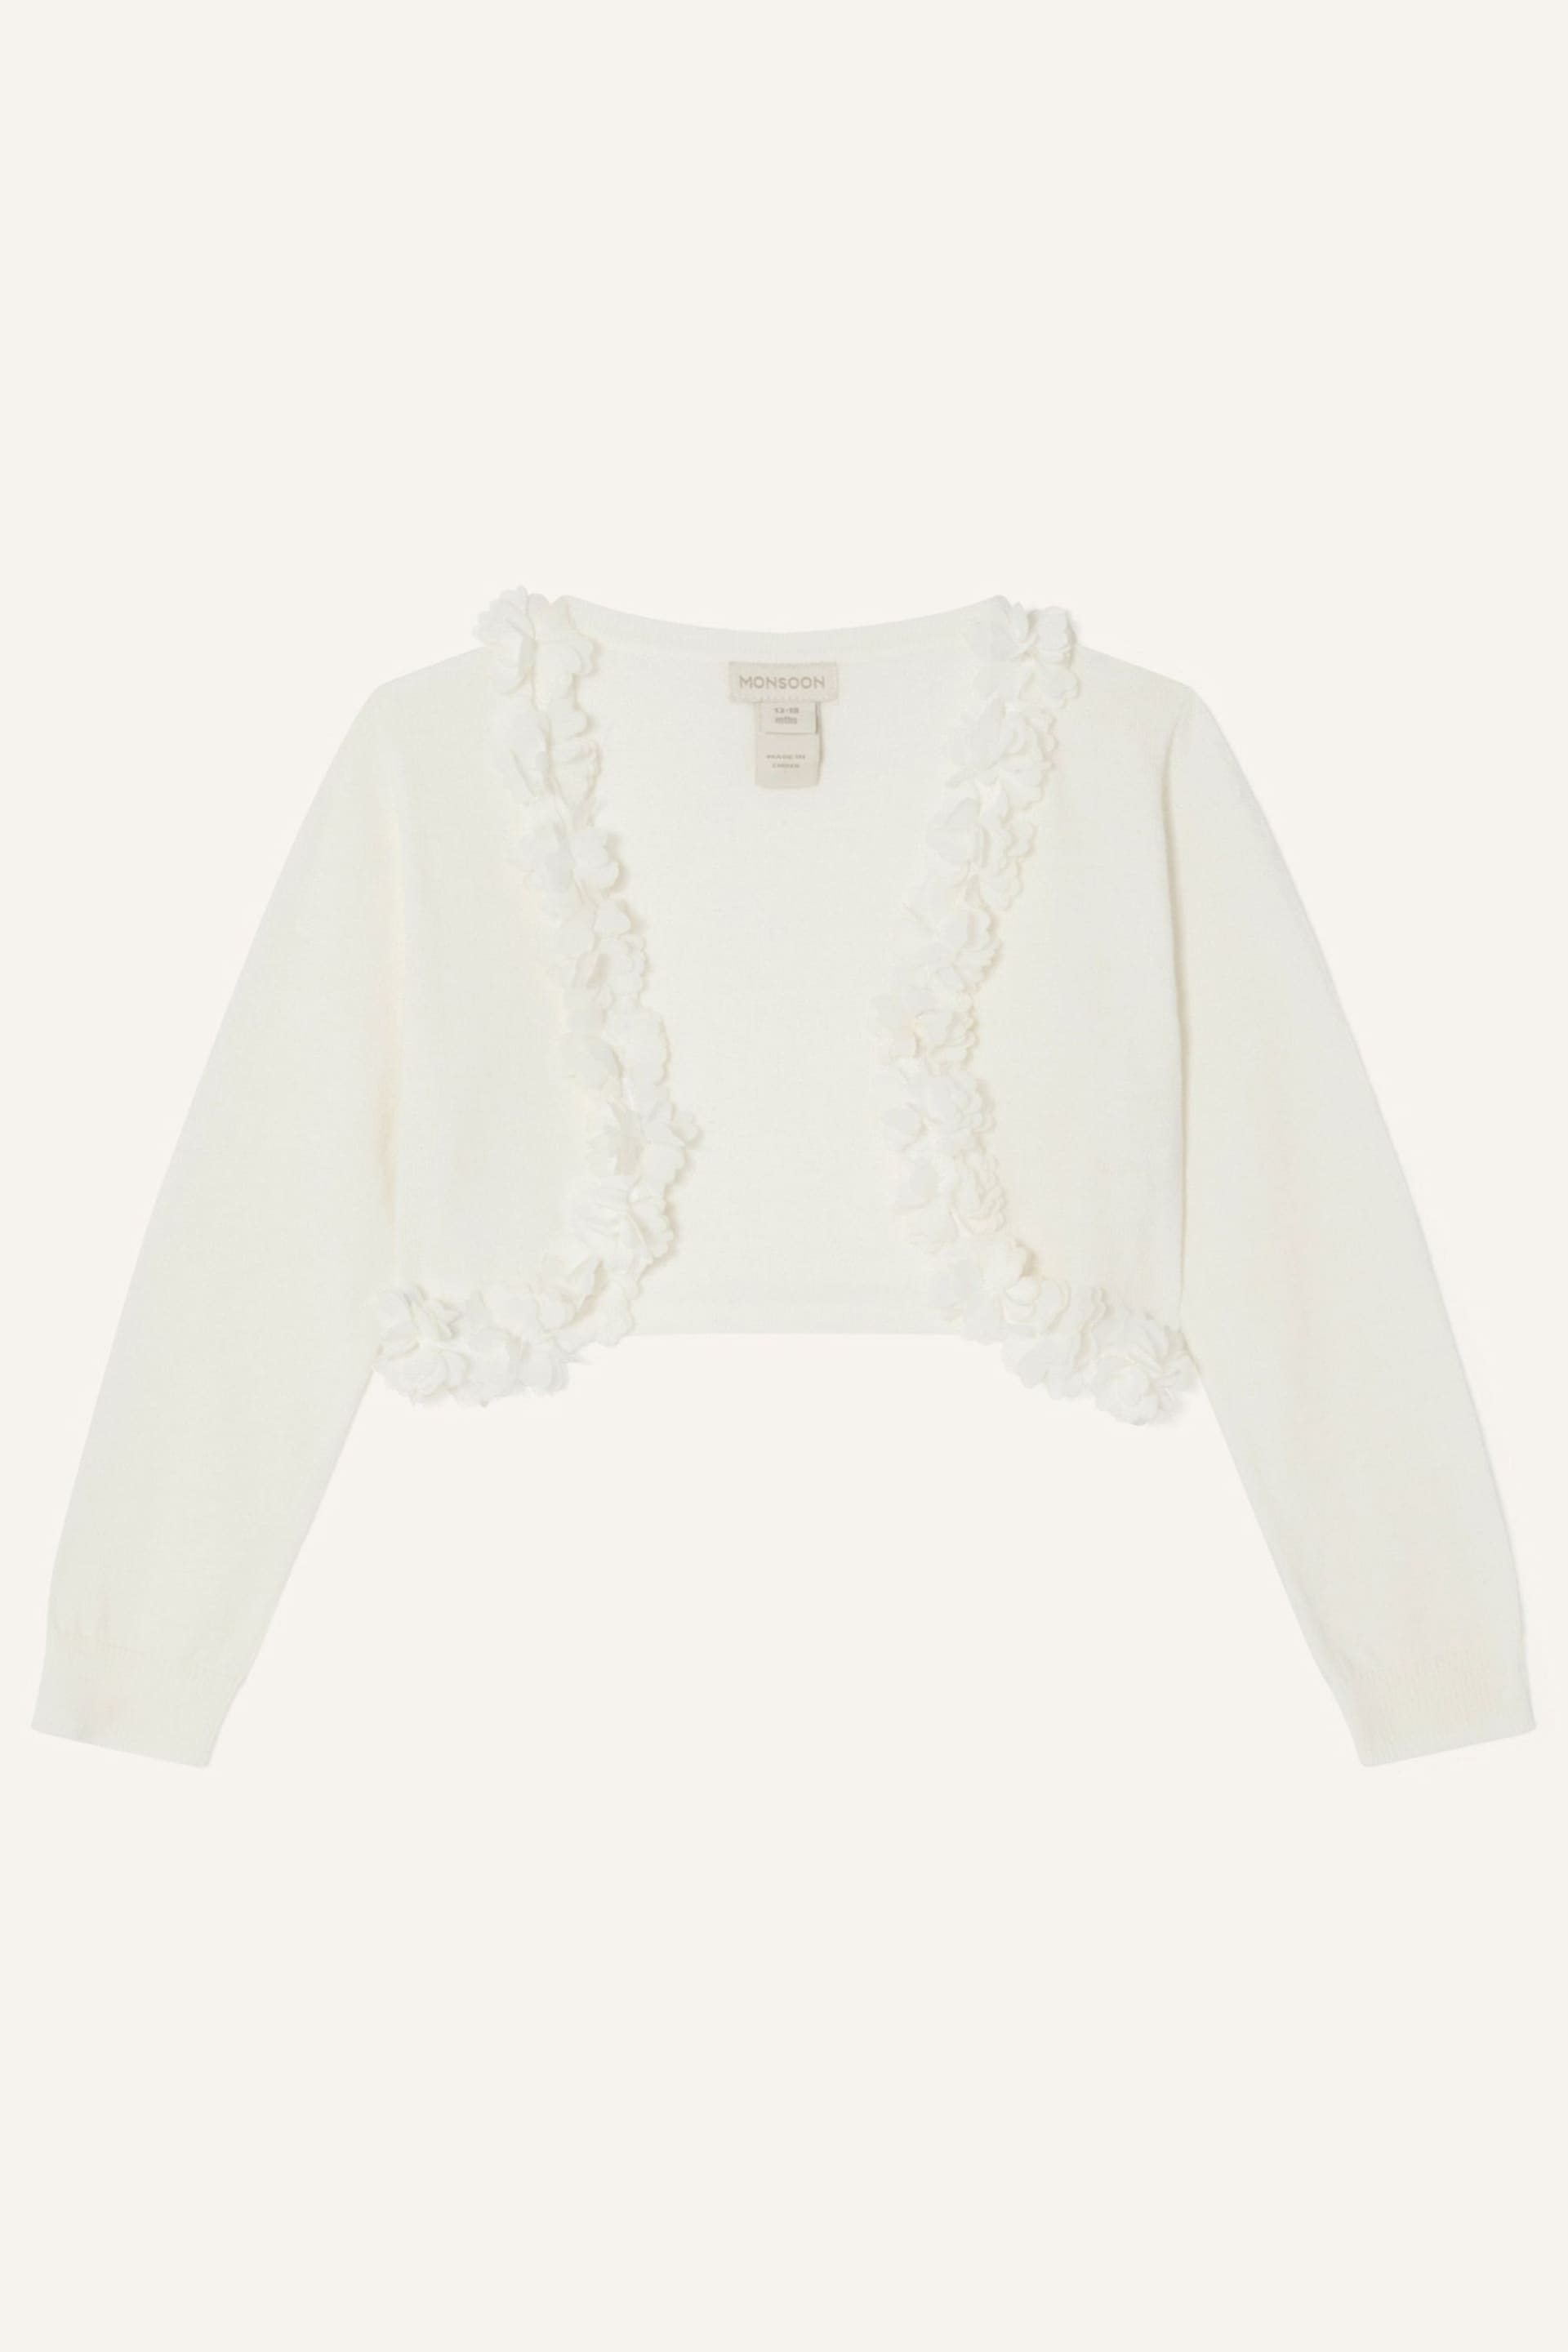 Monsoon White Floral 3D Cardigan - Image 1 of 2